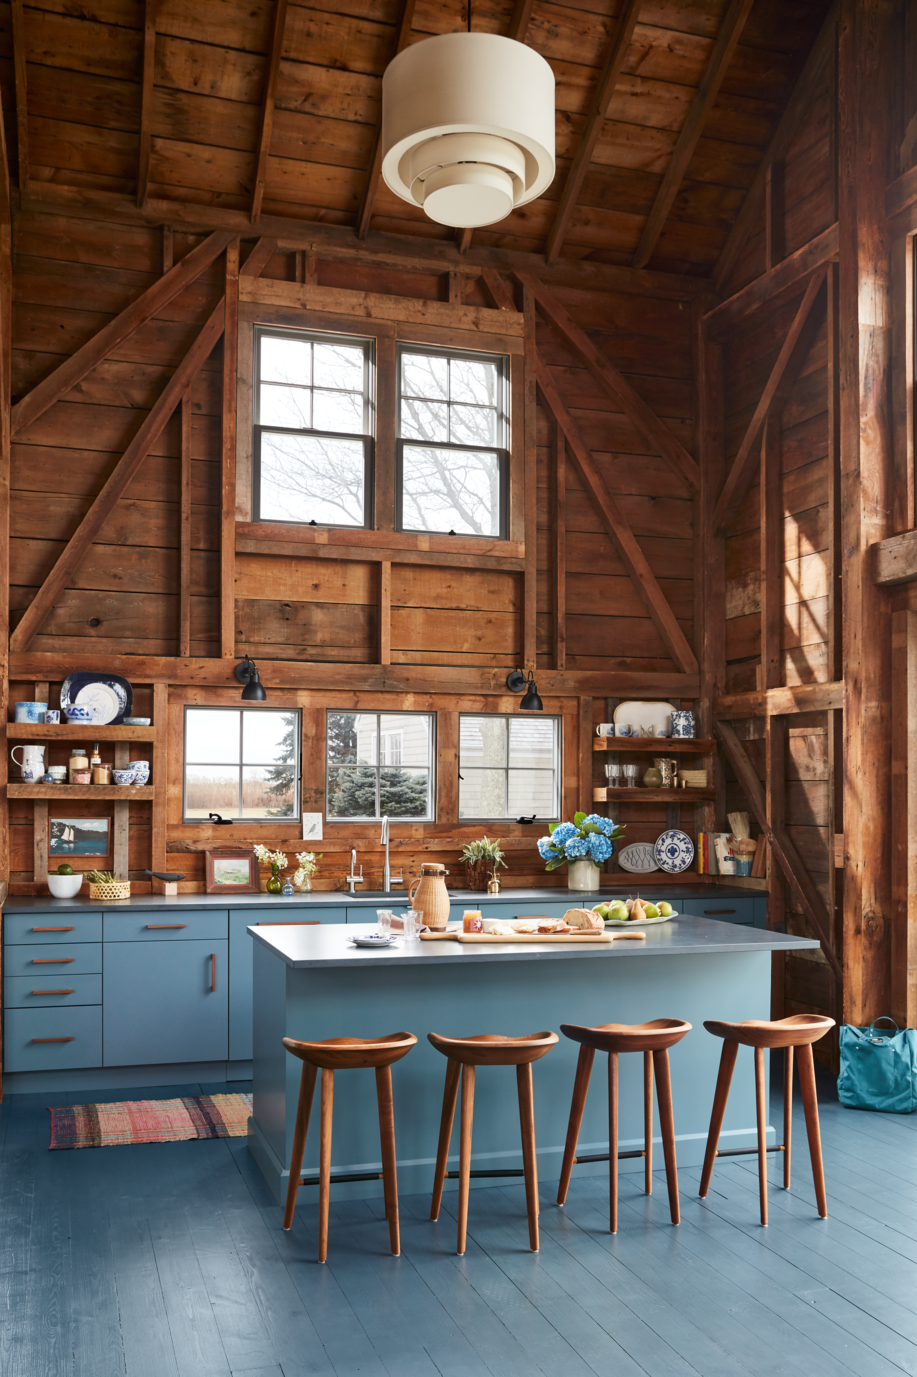 blue gray kitchen island with refrigerator drawers in rustic space with natural wood walls and vaulted ceiling